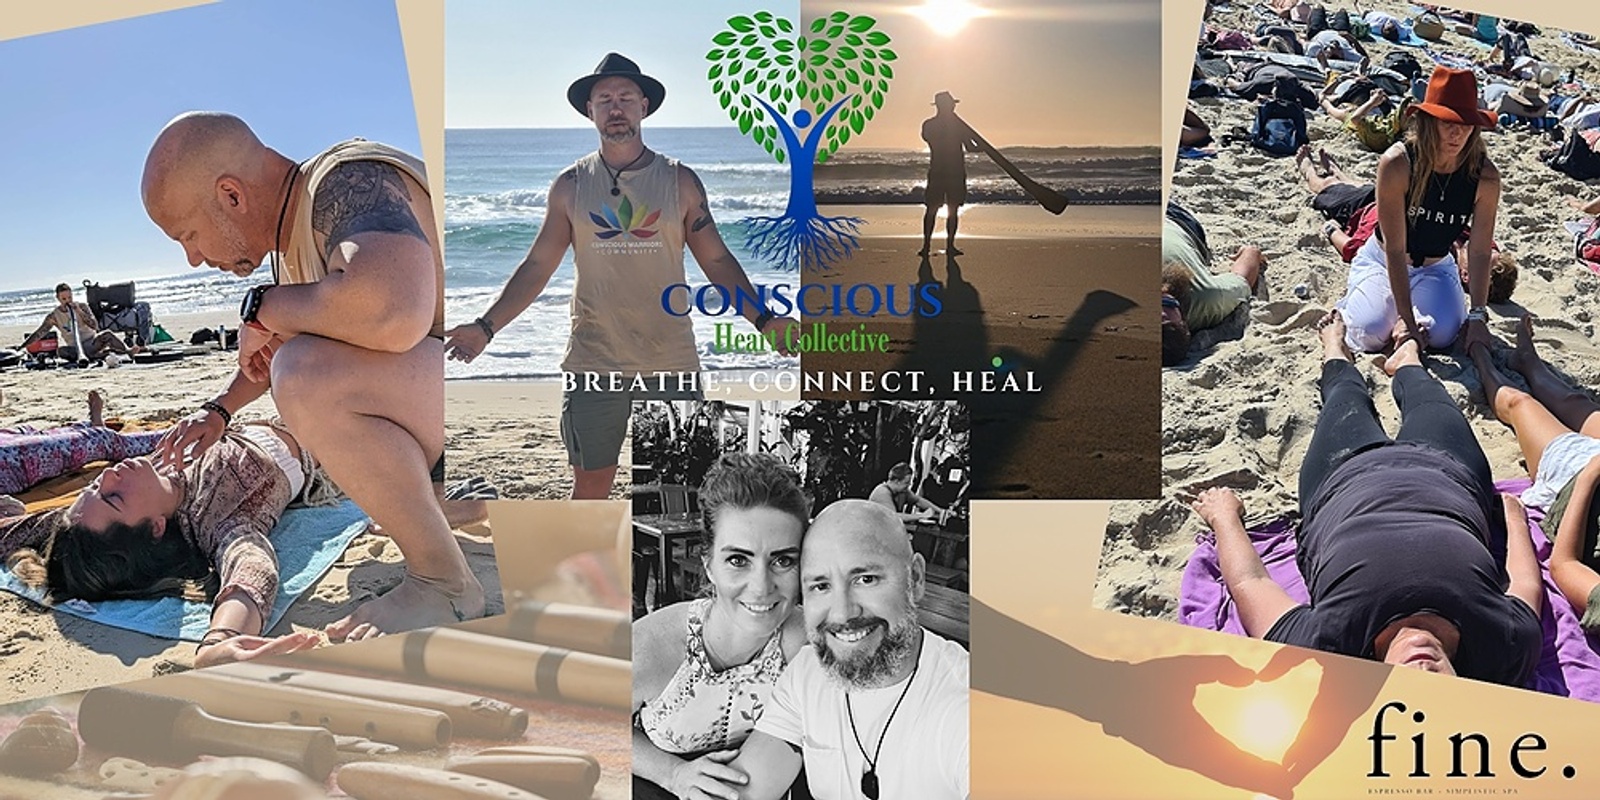 Conscious Heart Collective (Breathe, Connect, Heal) Connecting through unity and Breath...